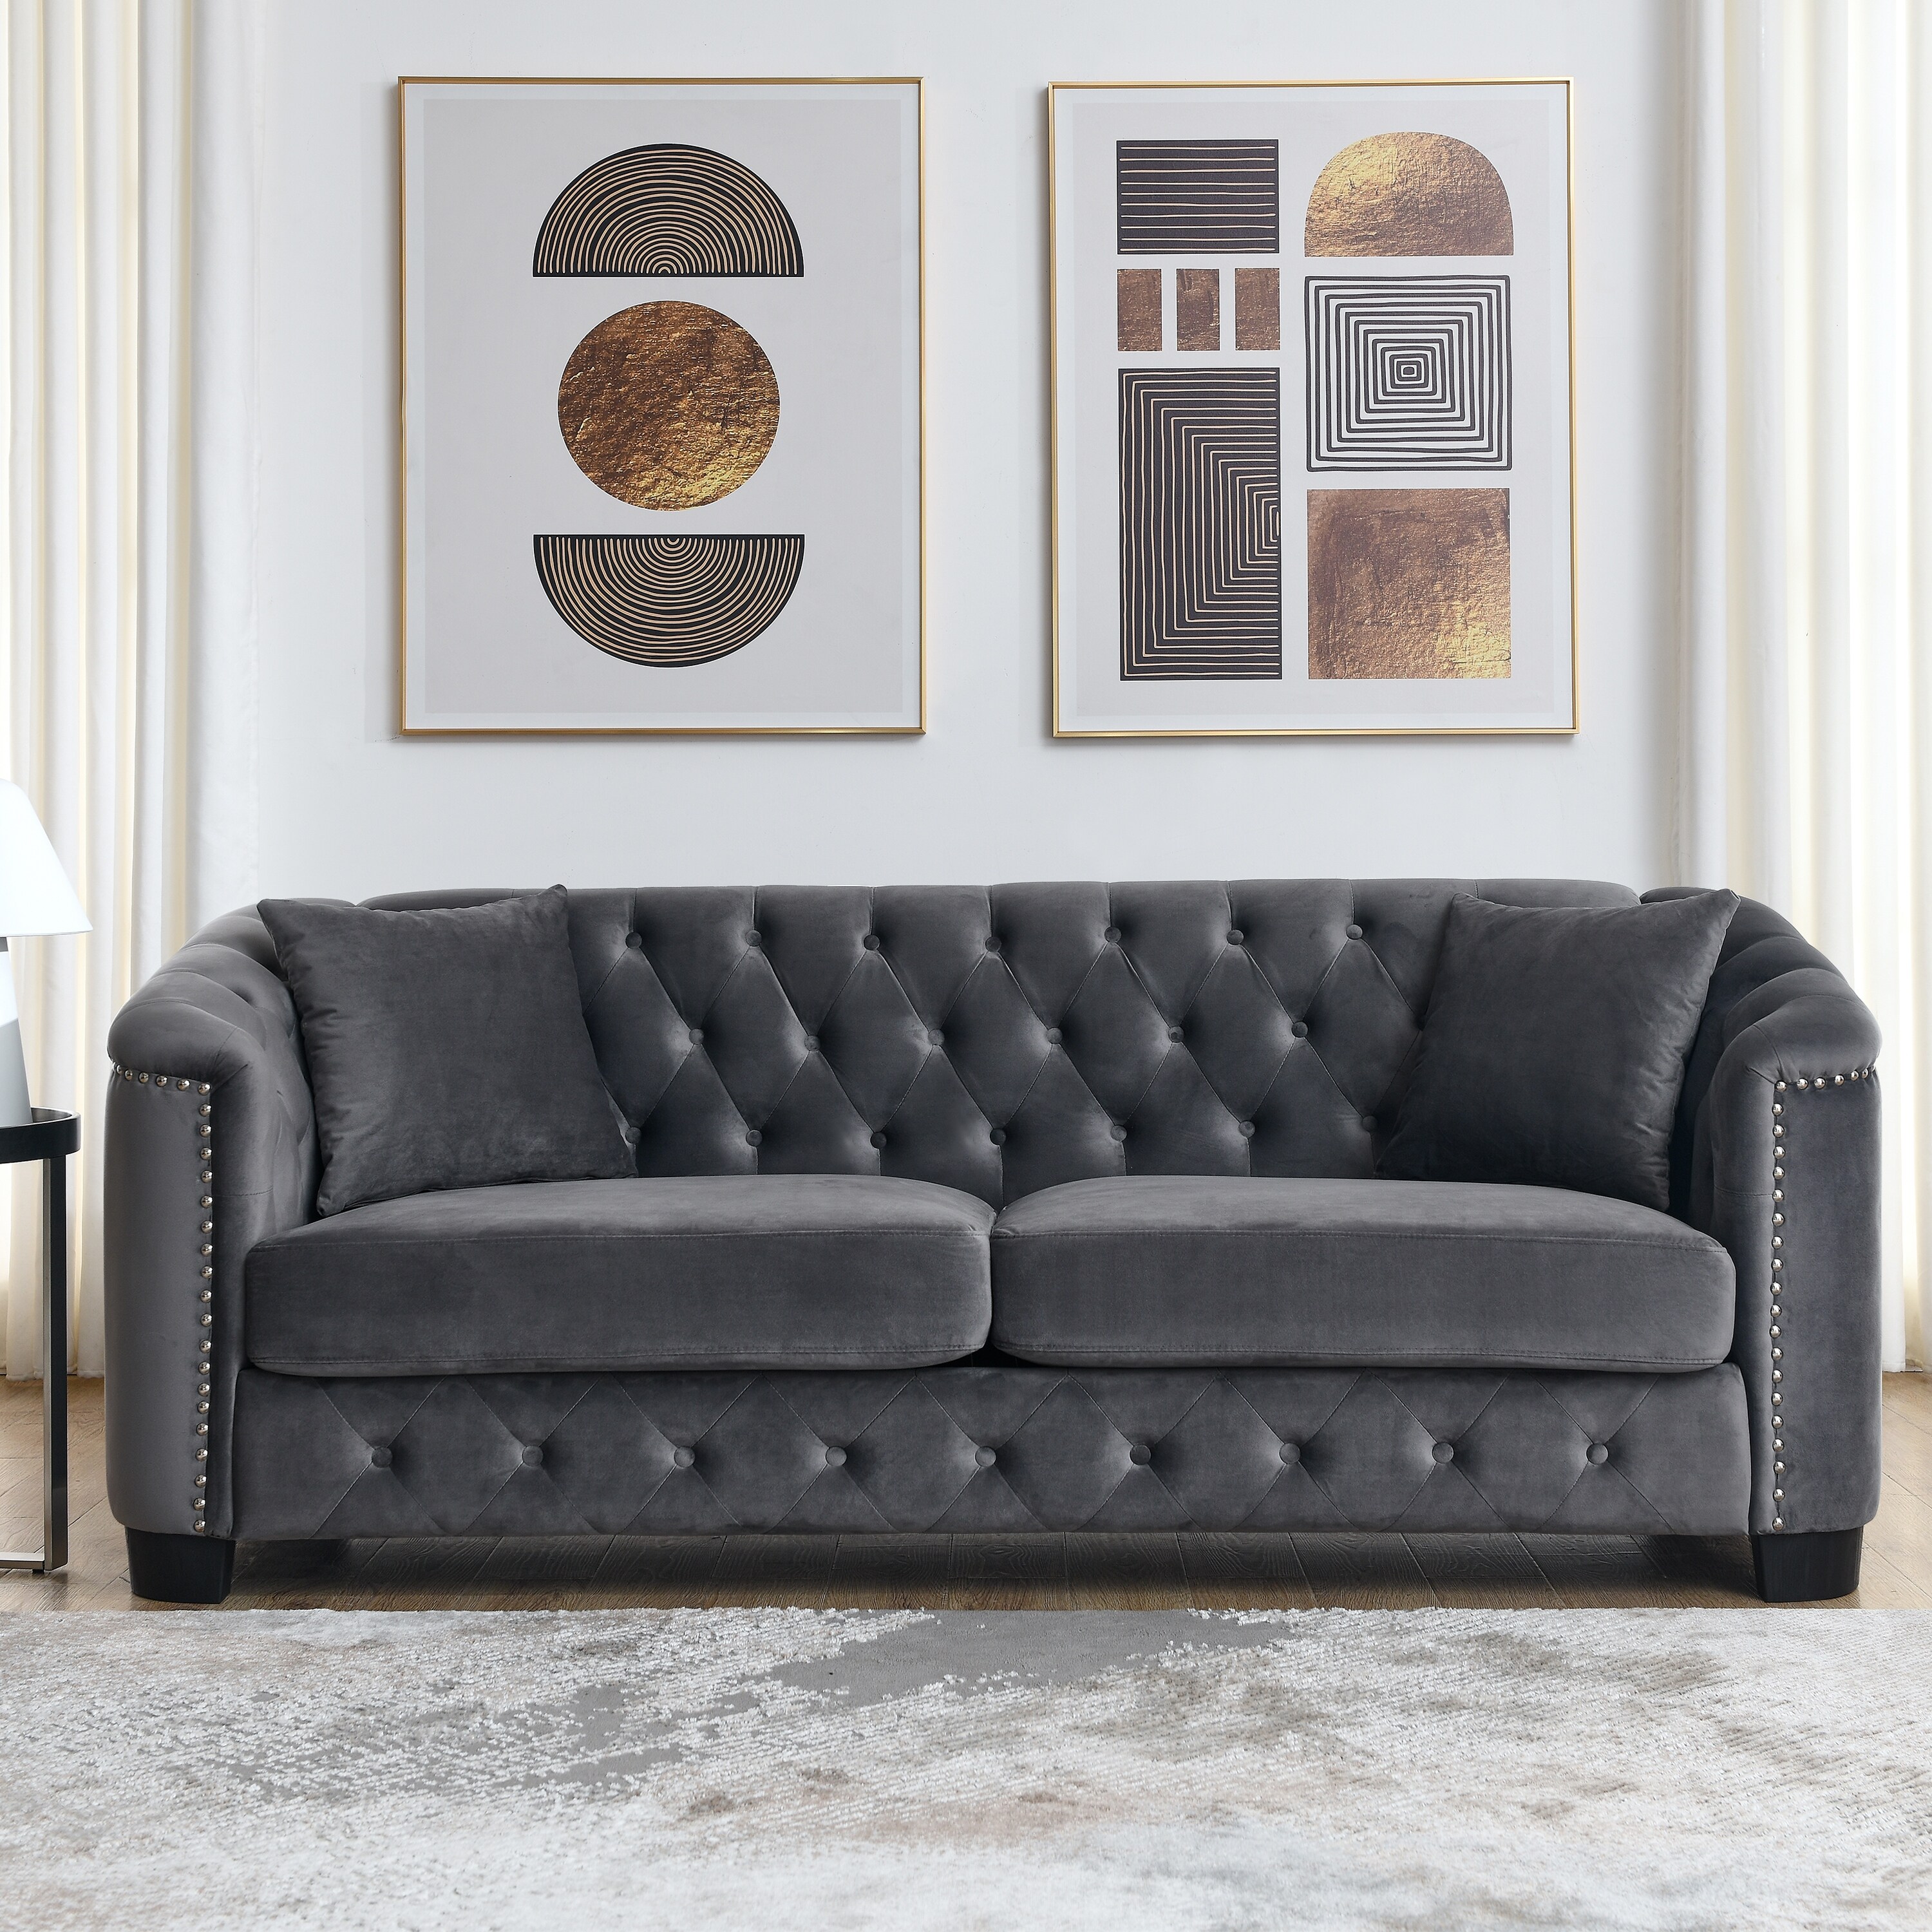 https://ak1.ostkcdn.com/images/products/is/images/direct/2122ce6668087ae8369a2cab50fd389244b11e62/Loveseat-%2B-3-Seater-Sofa-Set-Velvet-Upholstered-Couch-with-Pillows.jpg